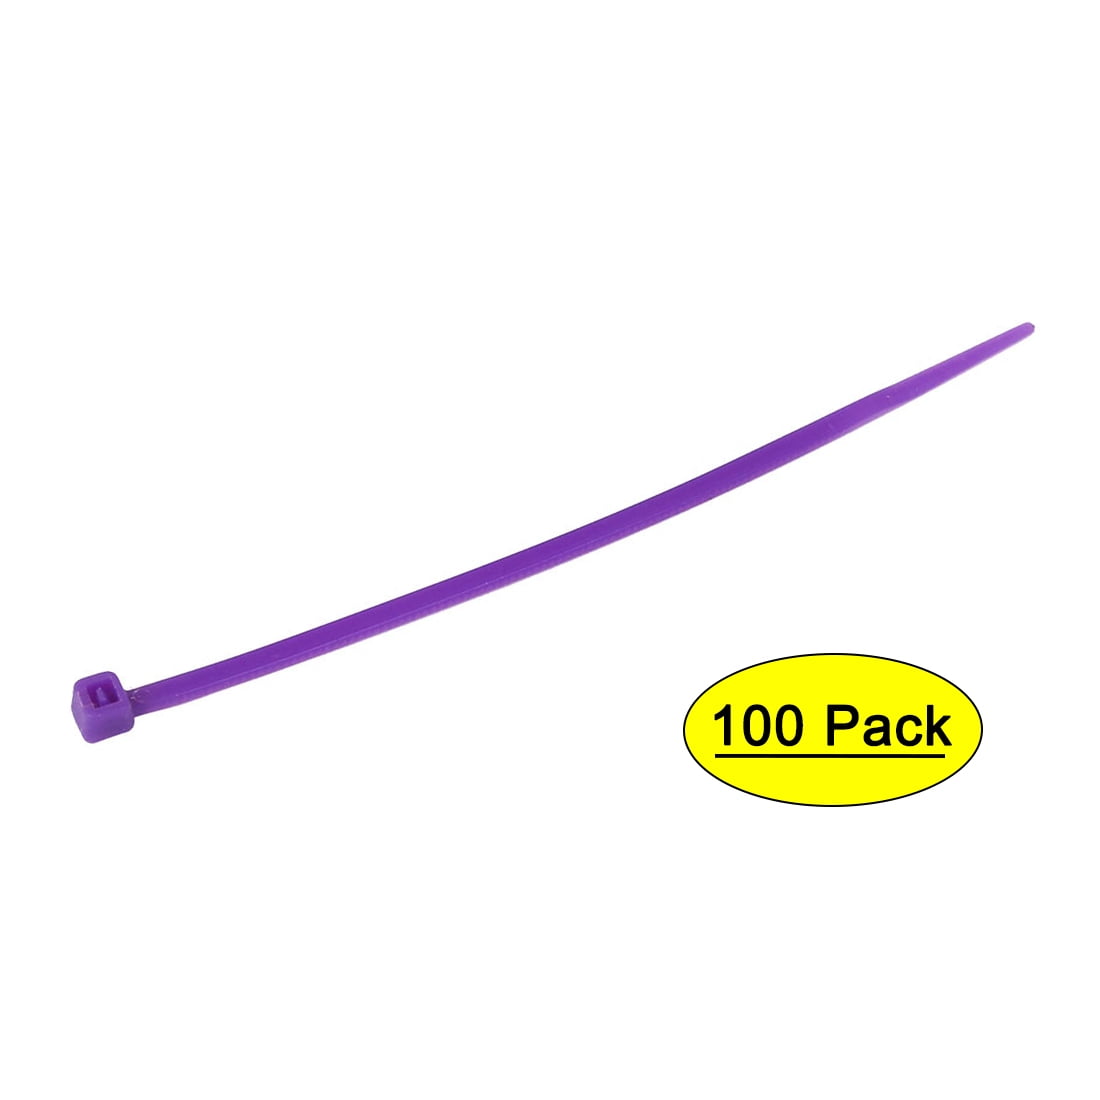 100mm Long Network Cable Cord Wire Zip Ties Straps Purple 100 Pcs 